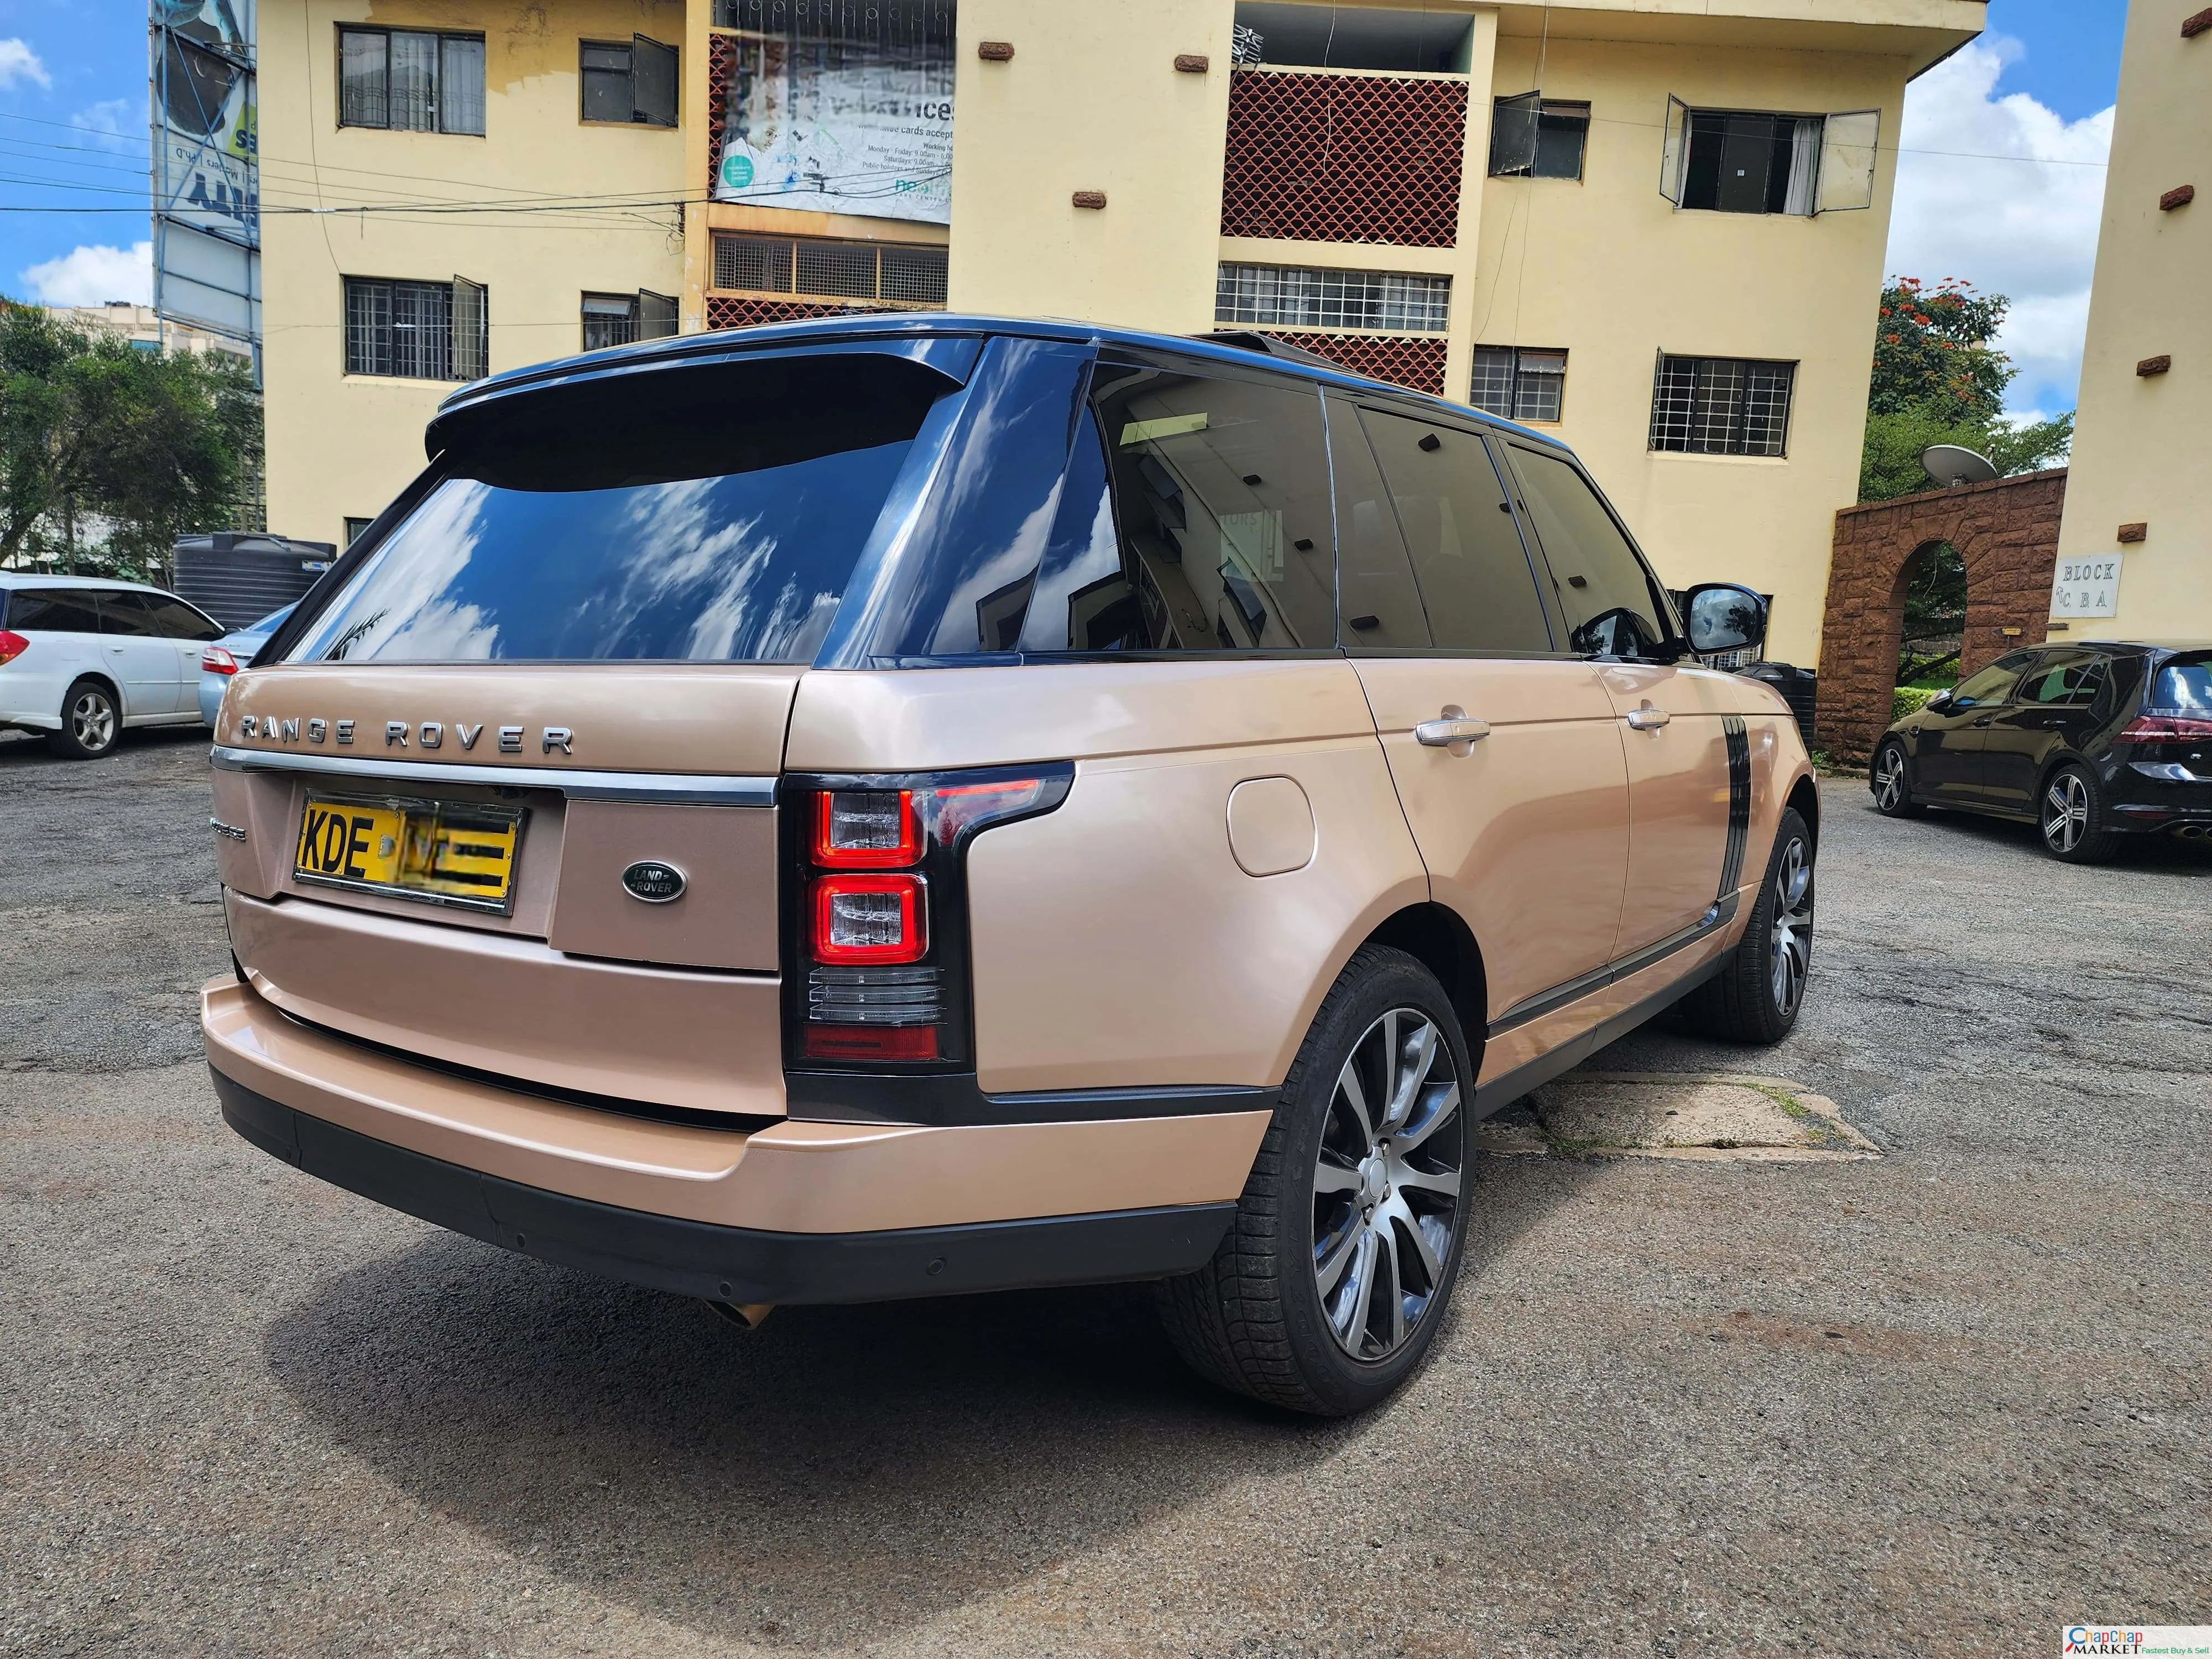 RANGE ROVER VOGUE JUST ARRIVED You Pay 40% DEPOSIT TRADE IN OK For sale in kenya exclusive 2017